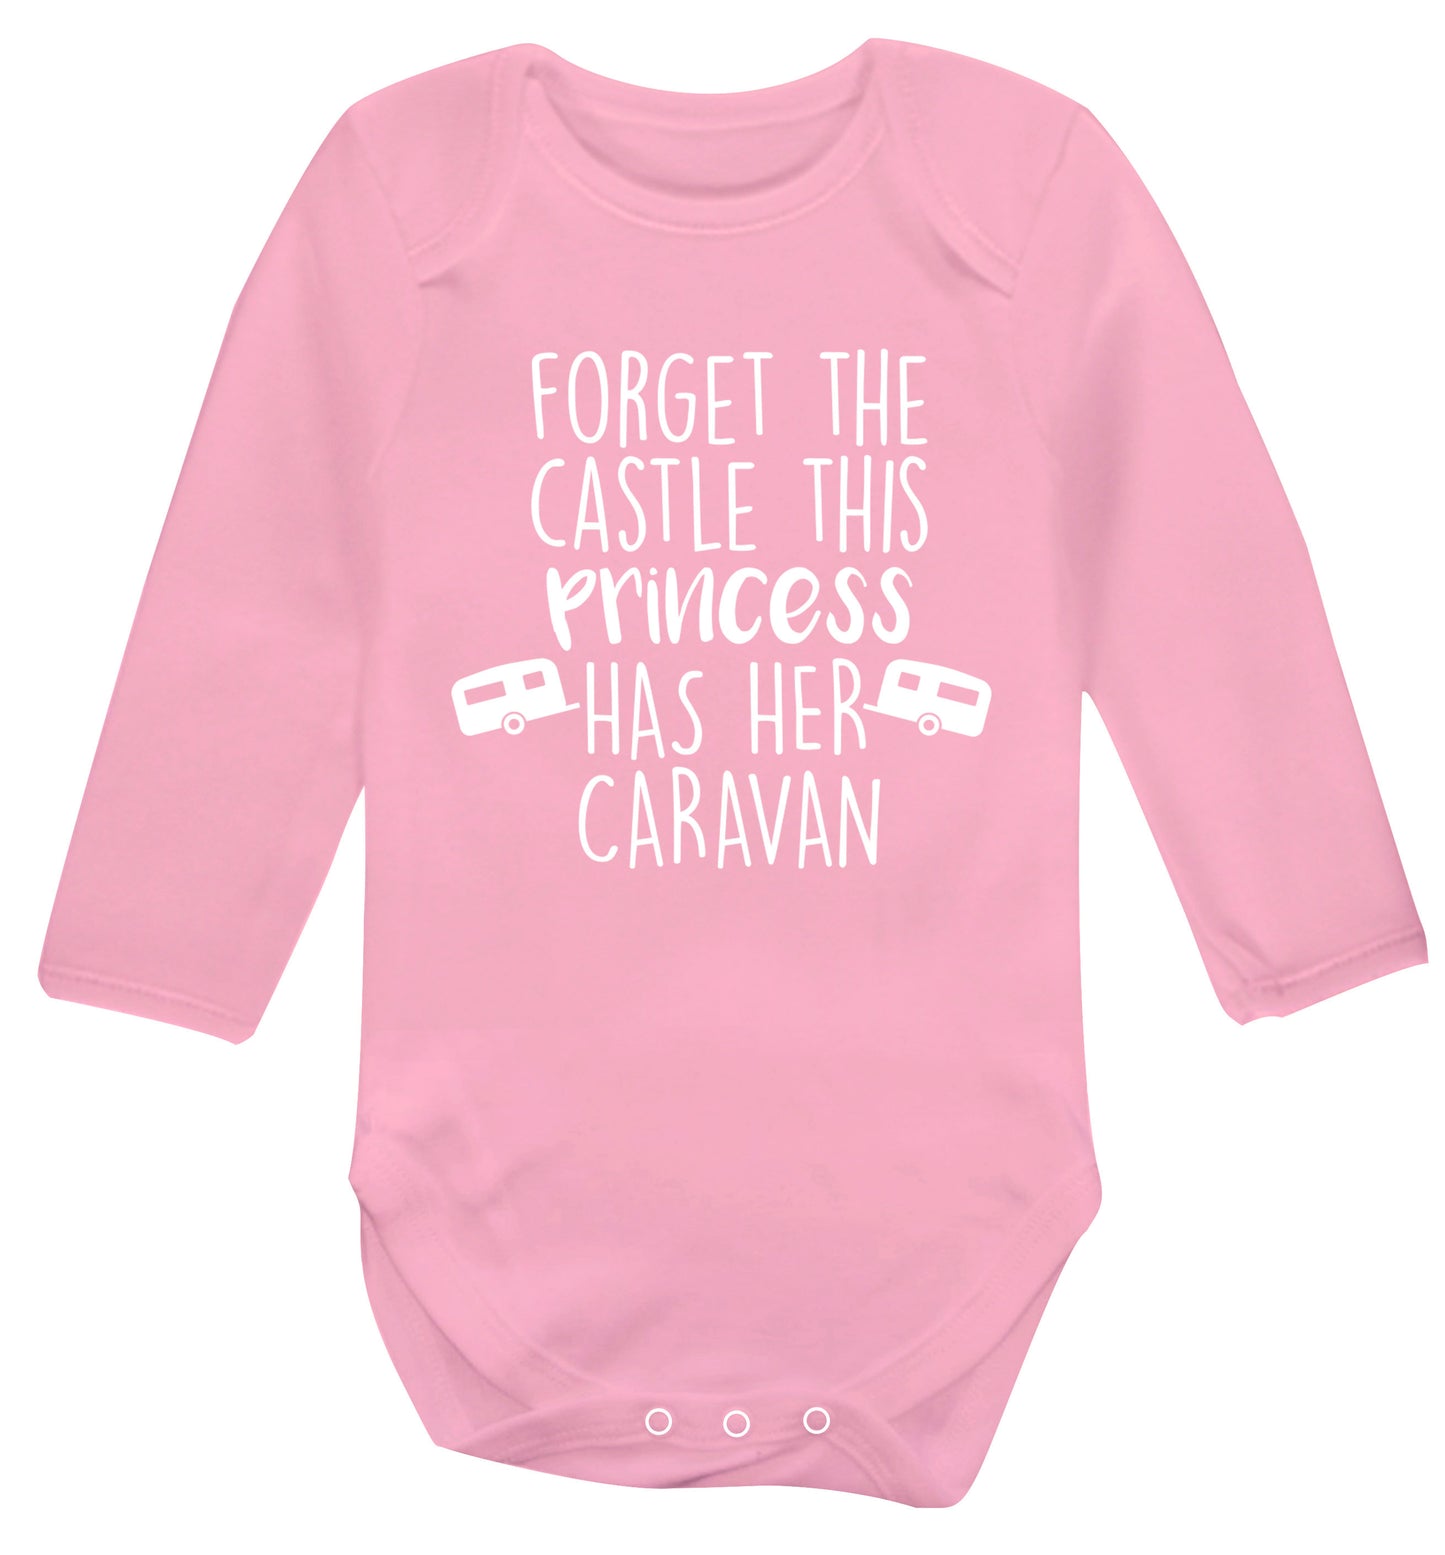 Forget the castle this princess lives at the caravan Baby Vest long sleeved pale pink 6-12 months